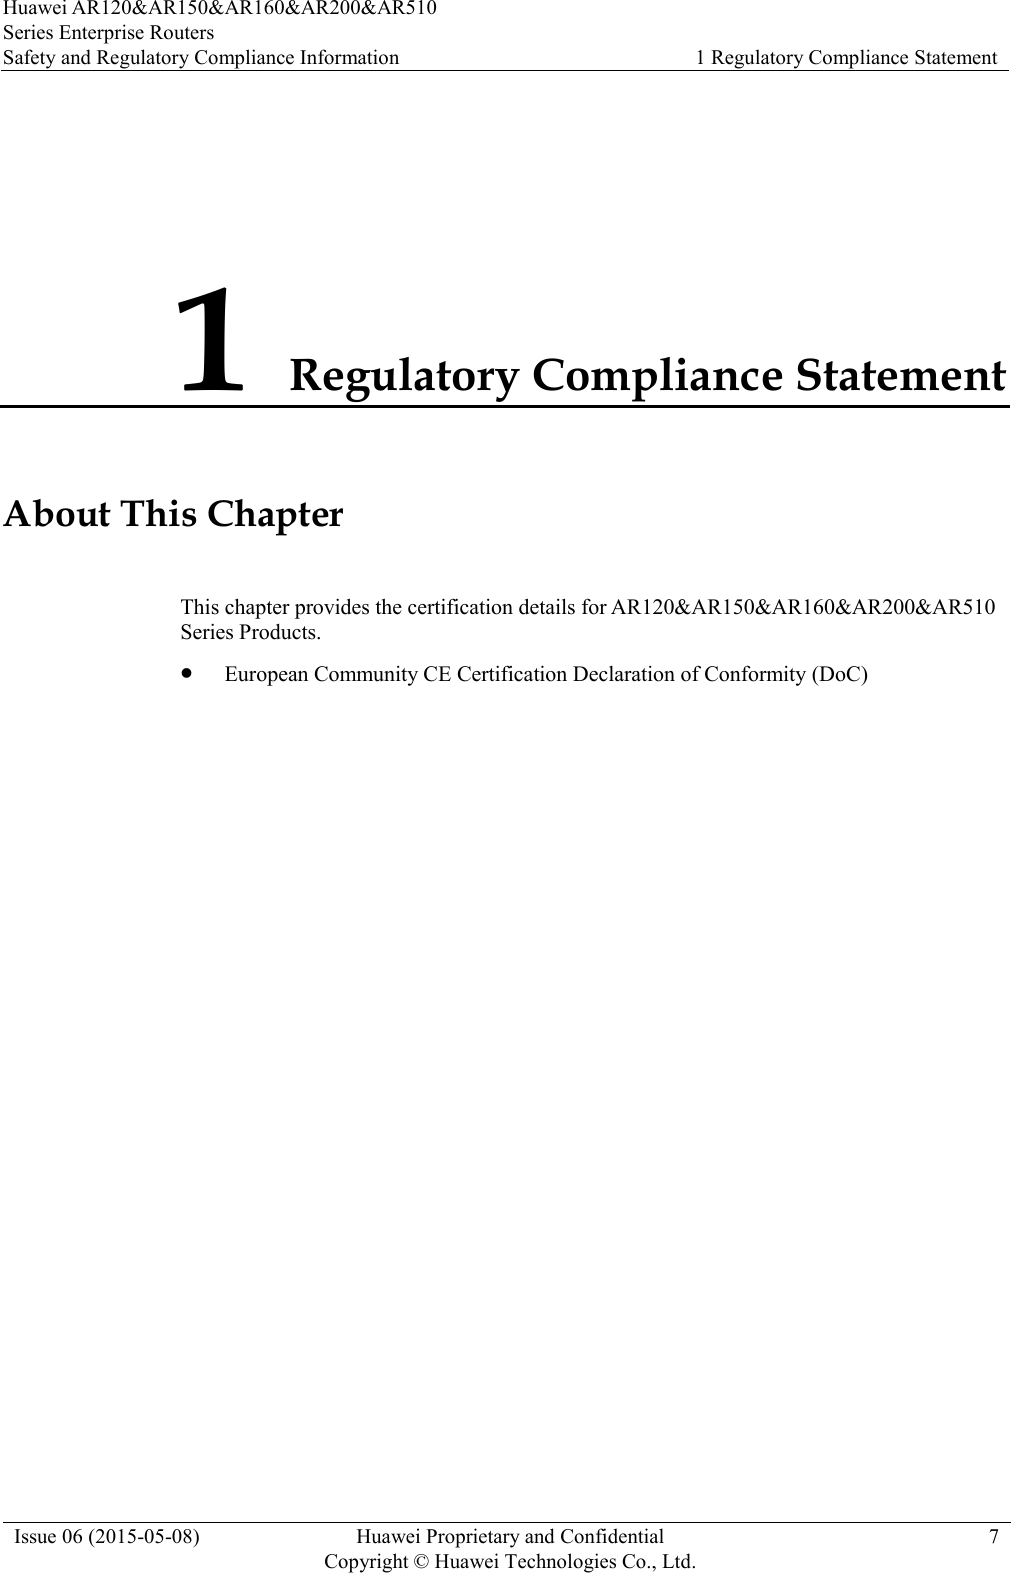 Huawei AR120&amp;AR150&amp;AR160&amp;AR200&amp;AR510 Series Enterprise Routers Safety and Regulatory Compliance Information 1 Regulatory Compliance Statement  Issue 06 (2015-05-08) Huawei Proprietary and Confidential           Copyright © Huawei Technologies Co., Ltd. 7  1 Regulatory Compliance Statement About This Chapter This chapter provides the certification details for AR120&amp;AR150&amp;AR160&amp;AR200&amp;AR510 Series Products.  European Community CE Certification Declaration of Conformity (DoC) 